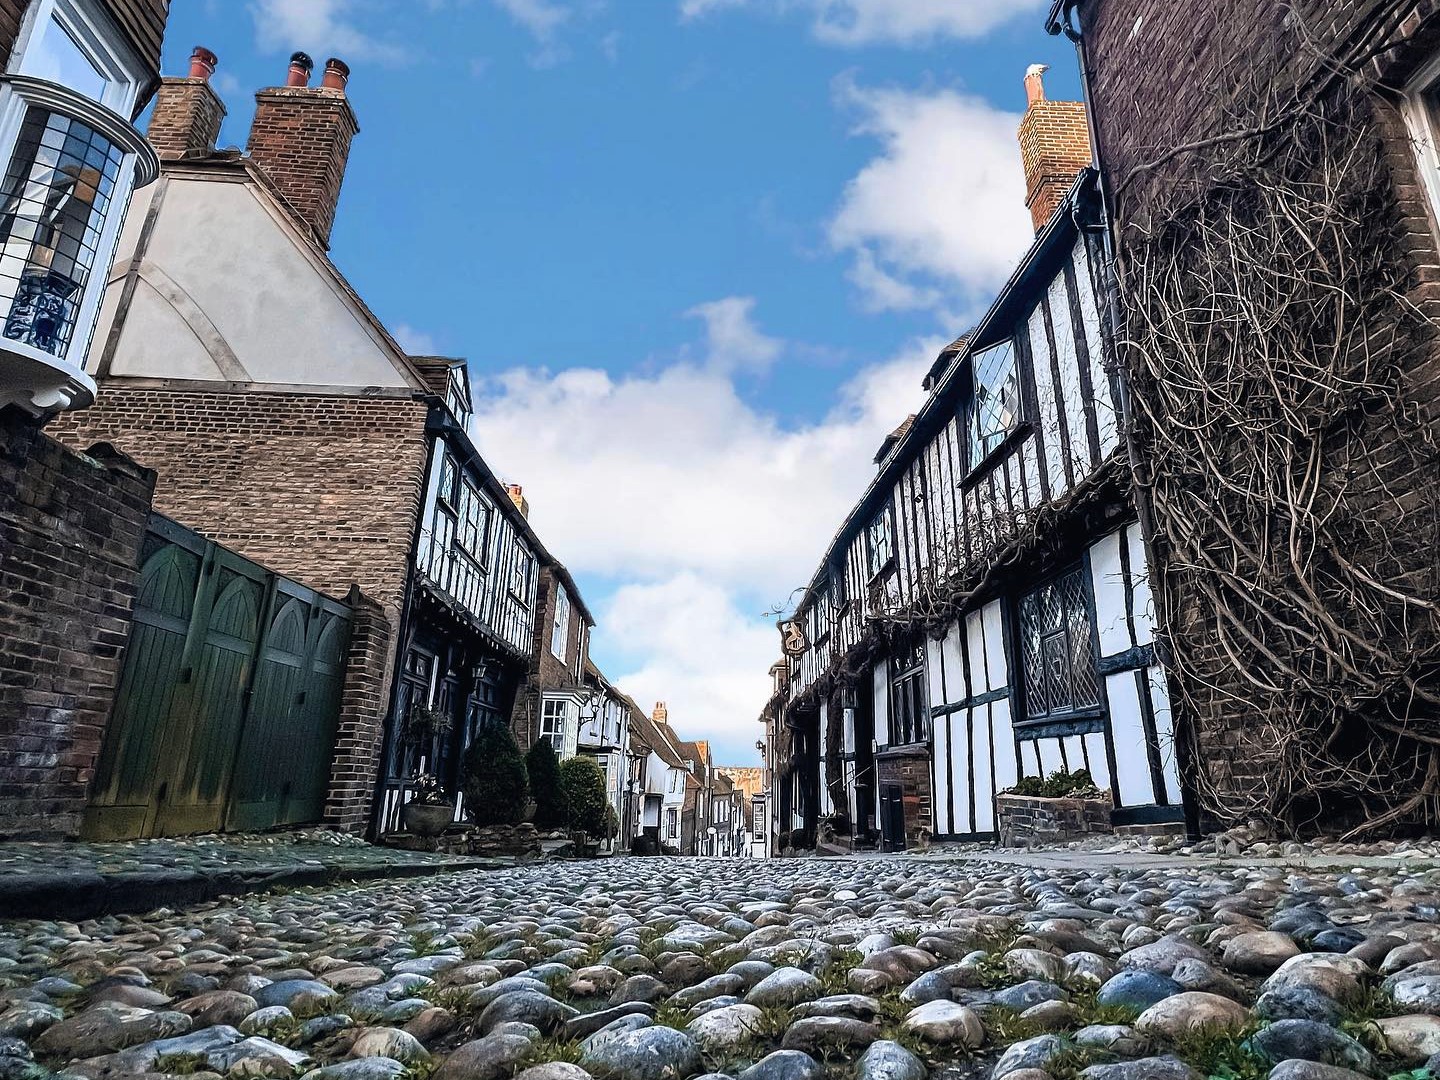 low level view of Rye cobbled street with old timber buildings